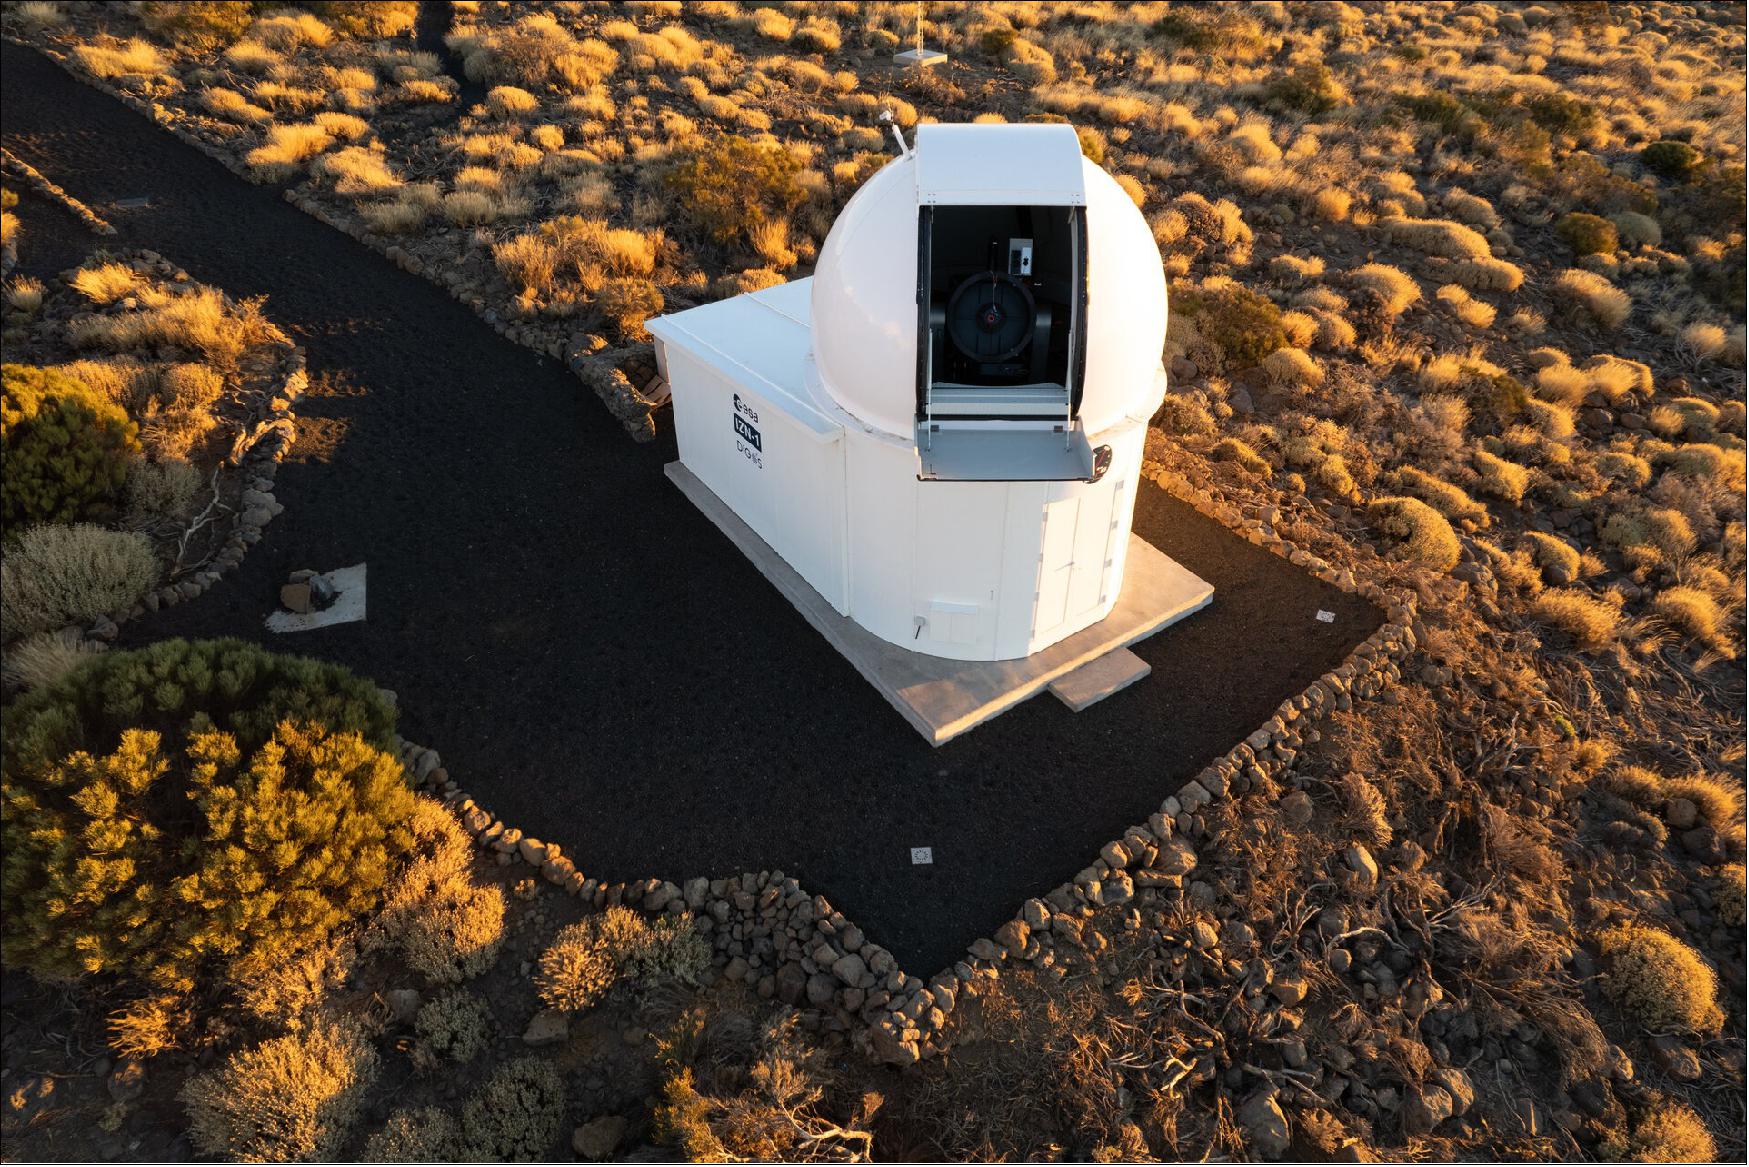 Figure 4: ESA's IZN-1 laser ranging station on top of the Izaña mountain in Tenerife, Spain, has recently undergone months of testing and commissioning, passing its final tests with flying colours. As it reached ‘station acceptance’, it was handed over to ESA from the German company contracted to build it, DiGOS. The station is a technology test bed and a vital first step in making debris mitigation widely accessible to all space actors with a say in the future of our space environment (image credit: ESA)